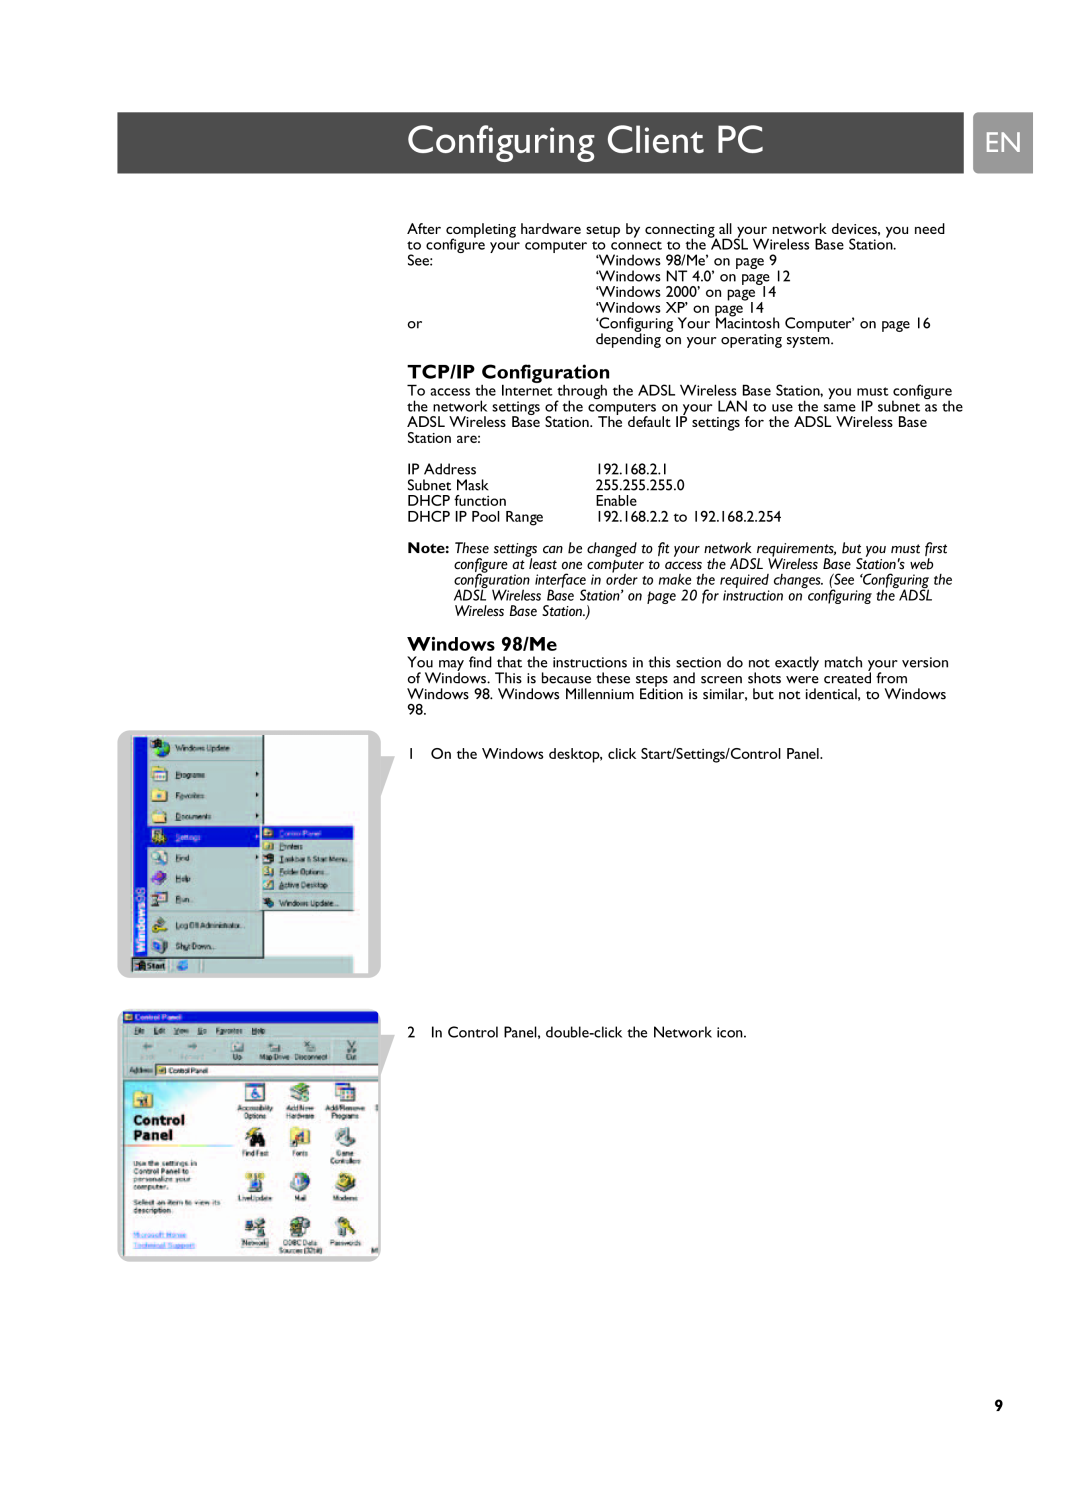 Philips SNA6500 user manual Configuring Client PC, TCP/IP Configuration, Windows 98/Me 